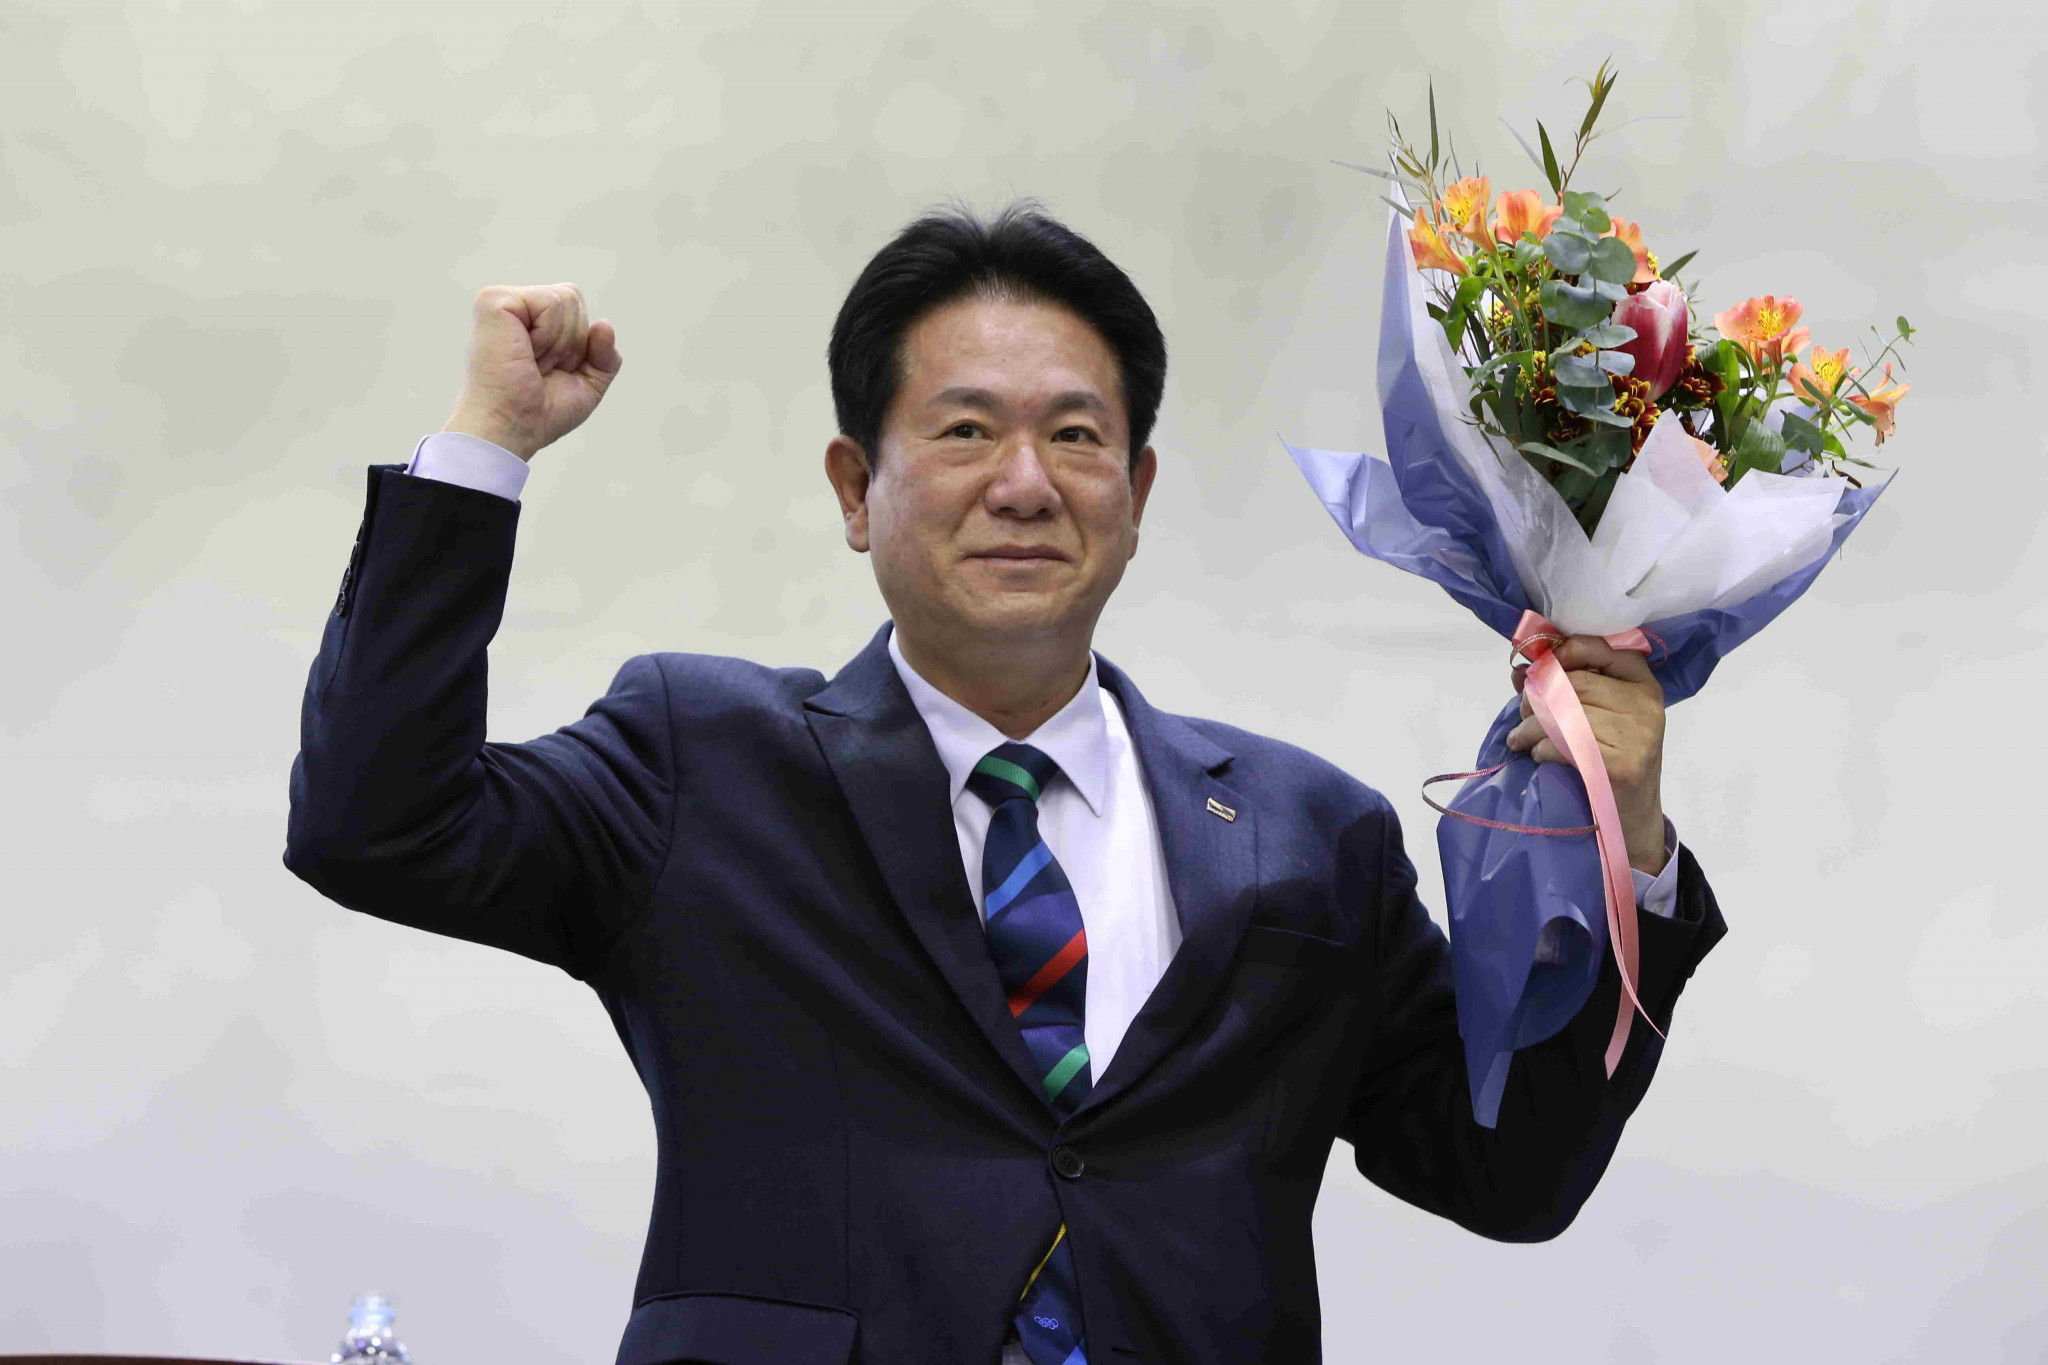 Lee defeats Lim in by-election to become new President of Kukkiwon